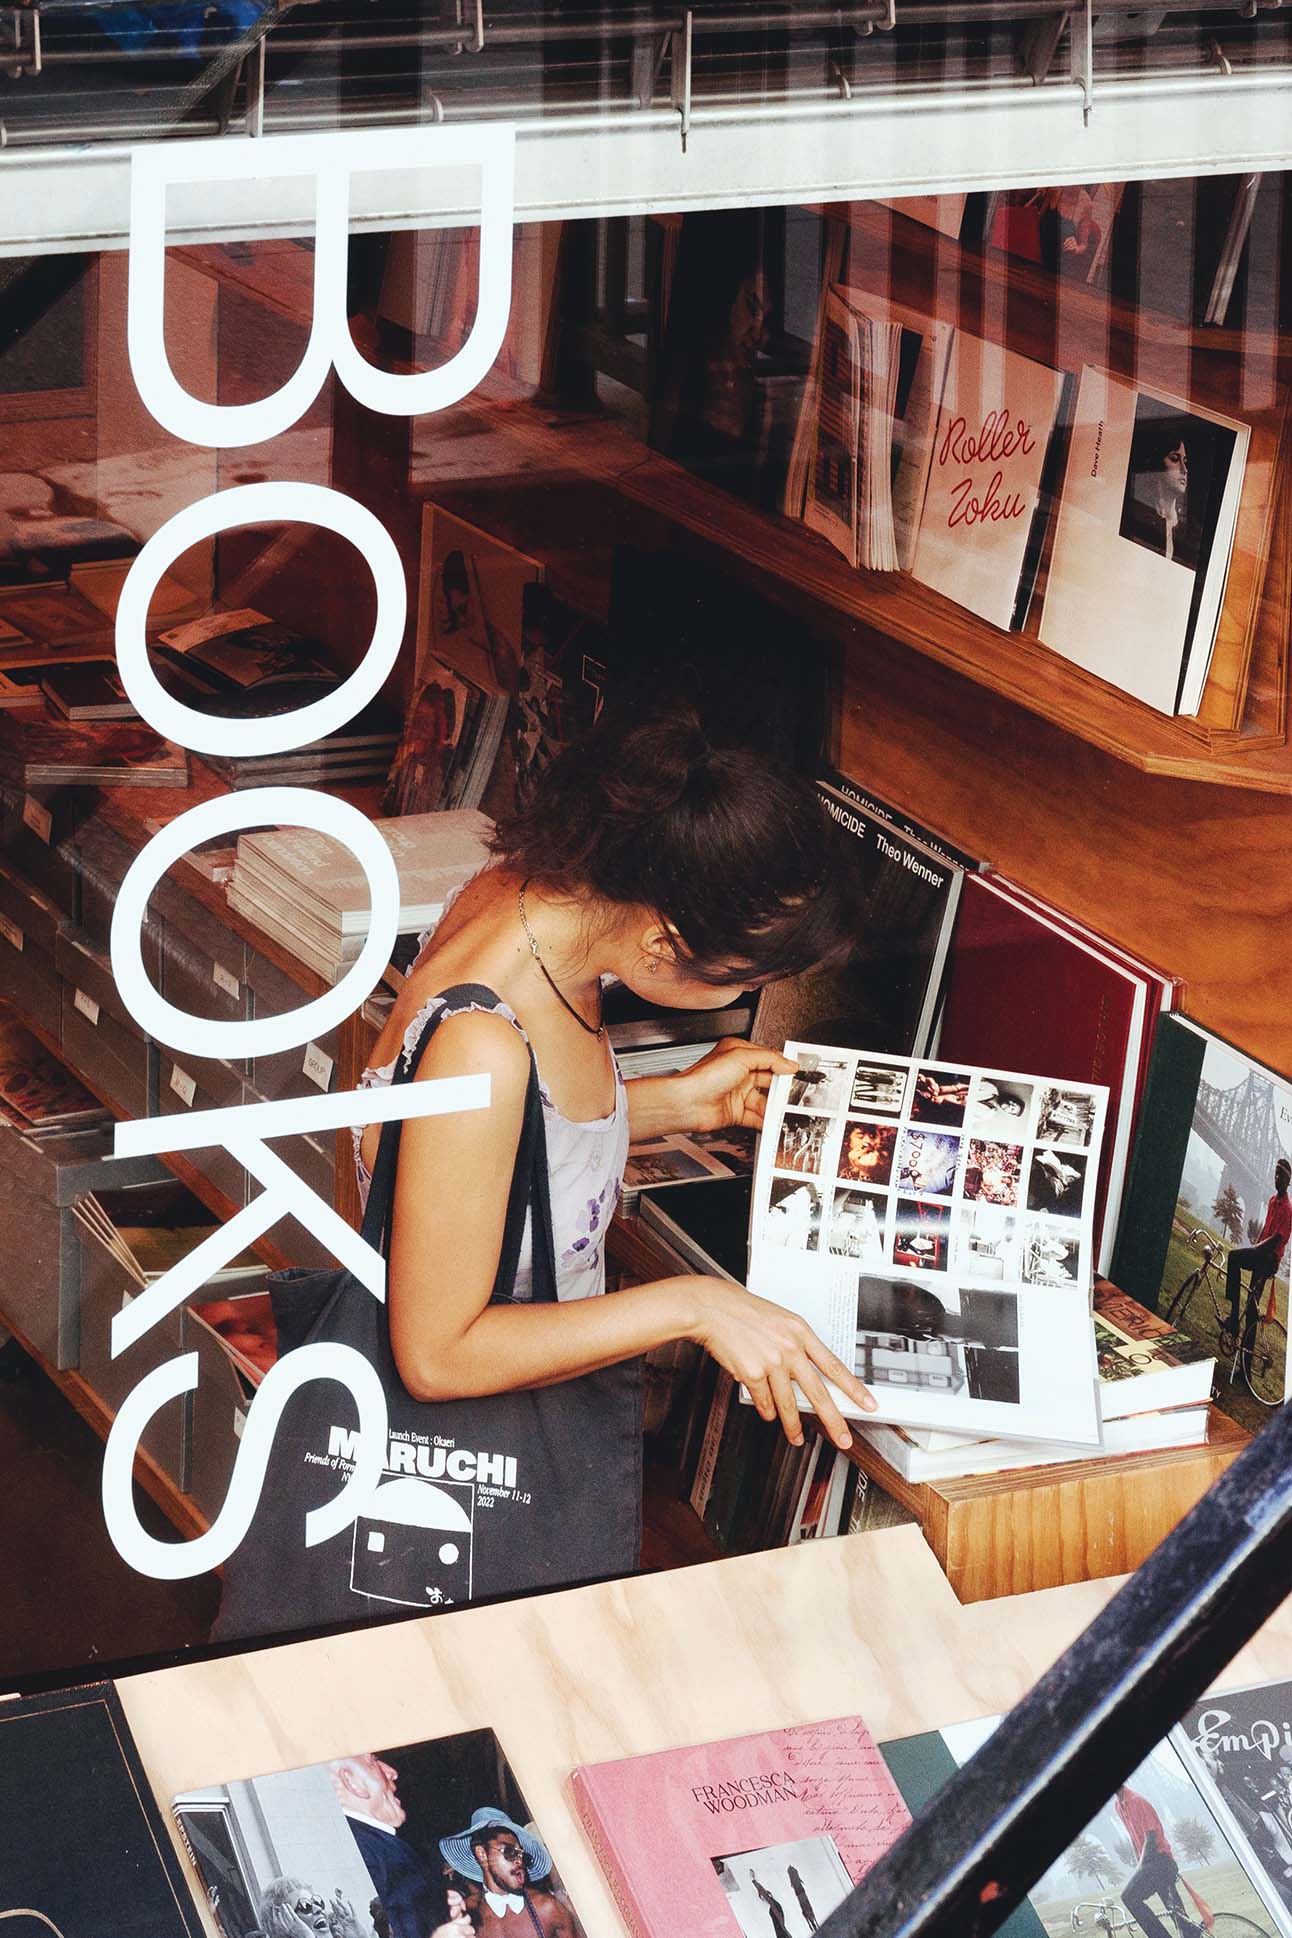 Emily May Jampel looking through books in Dashwood Books located in New York